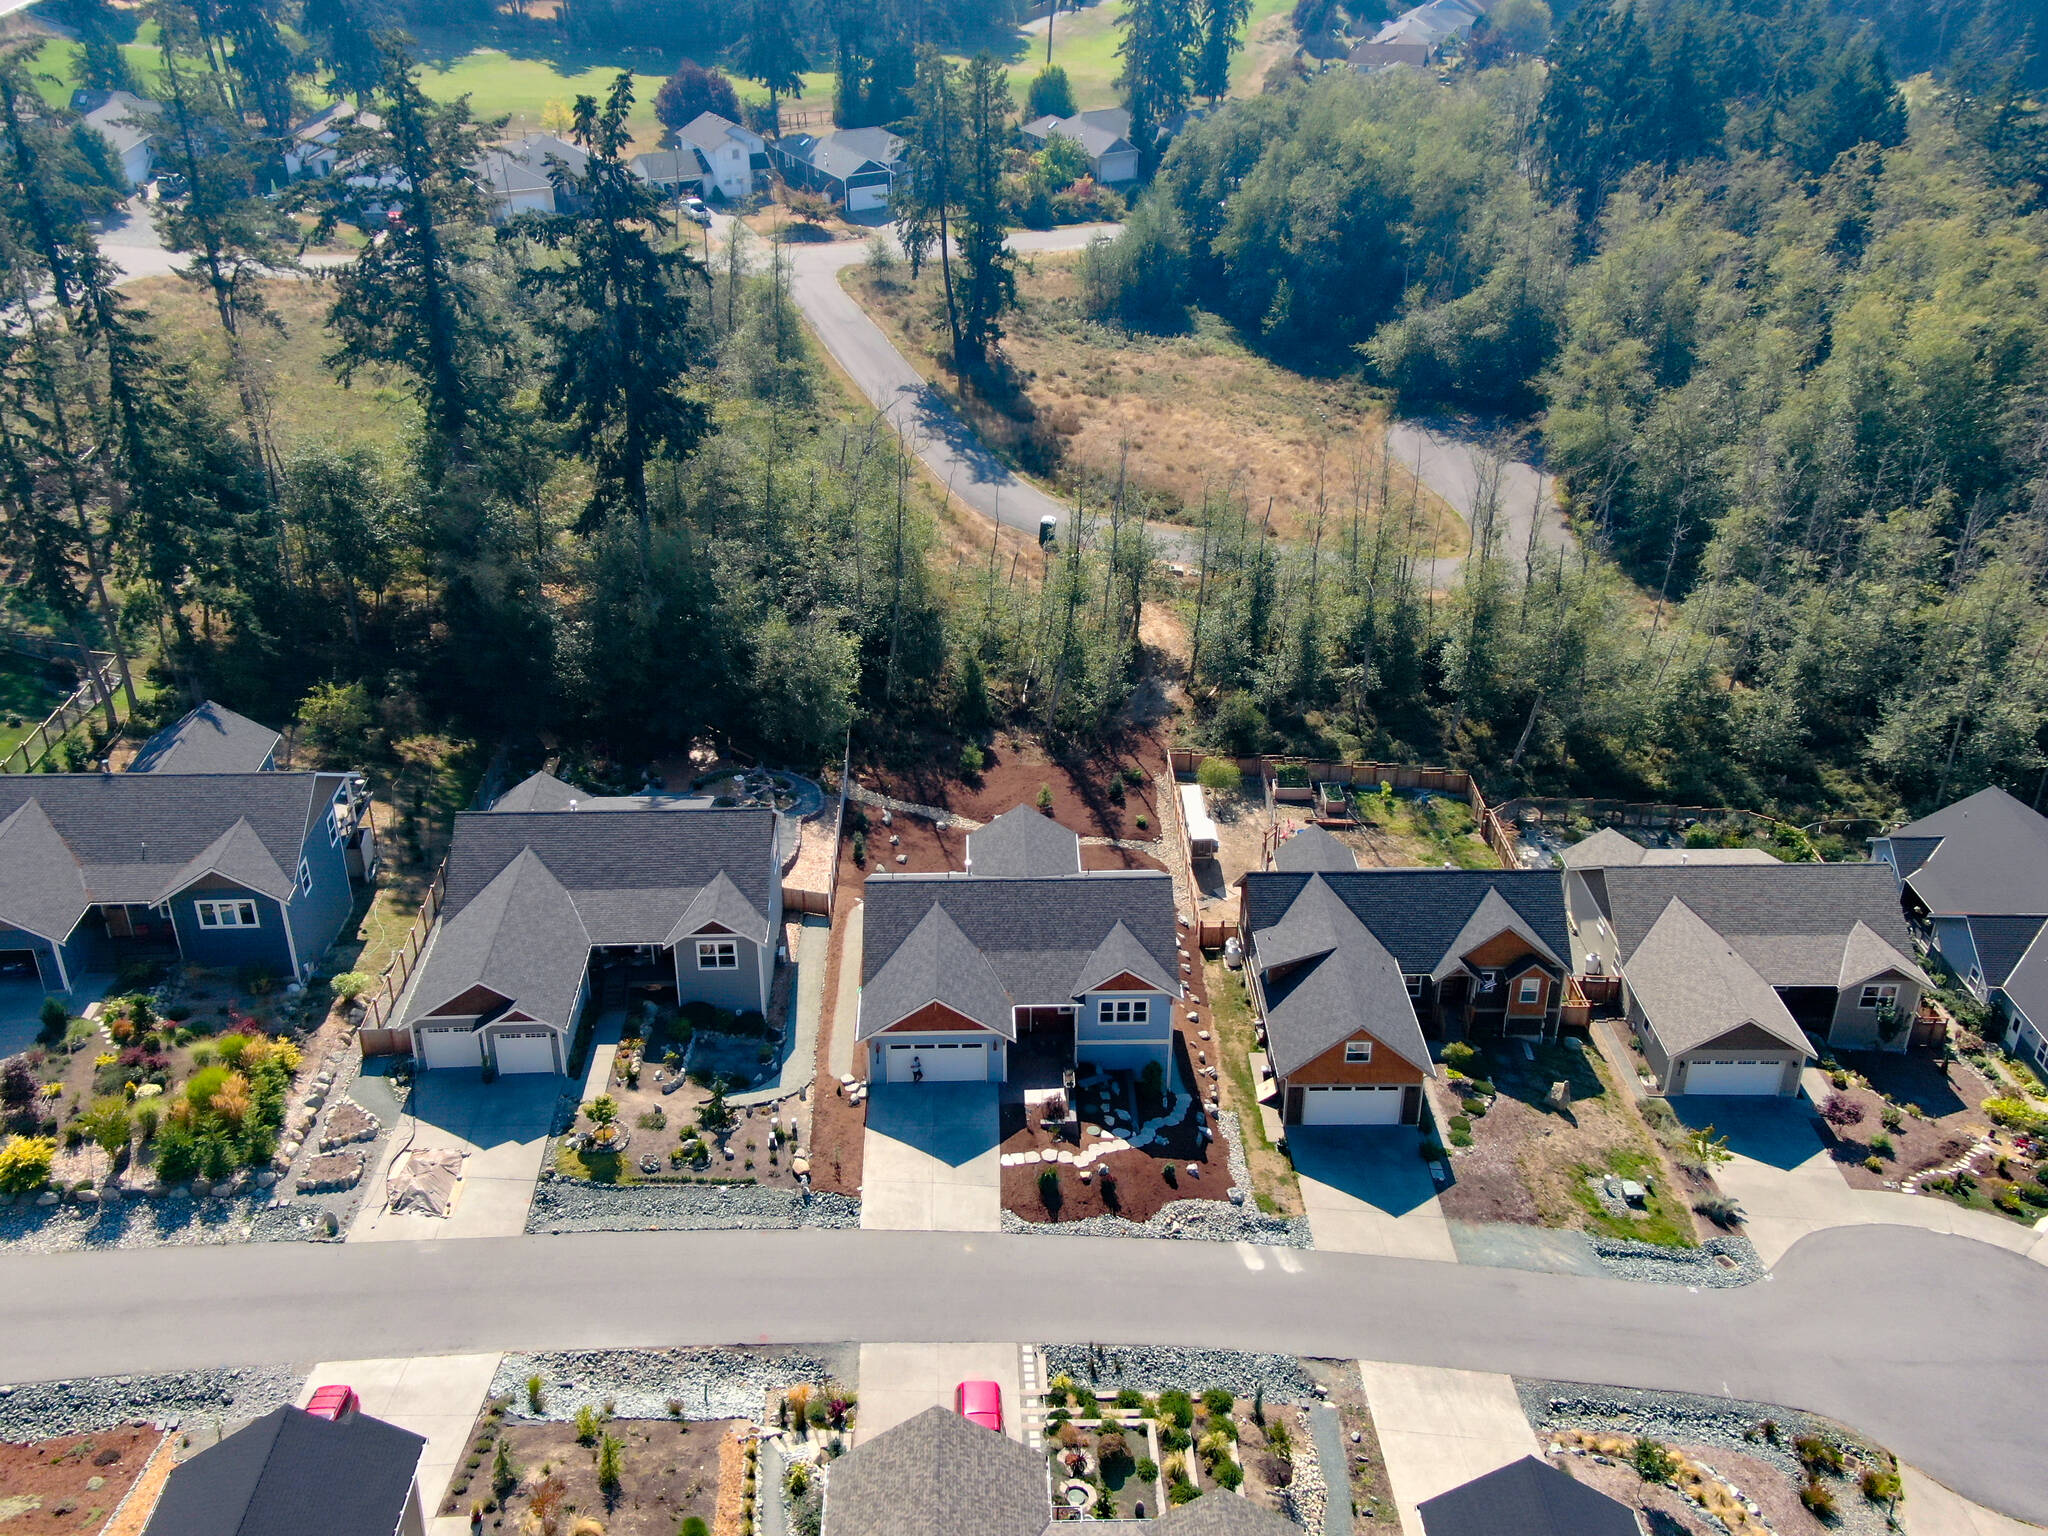 Recent high interest rates have slowed what was a red-hot housing market on Whidbey Island. (Photo provided by Windermere)